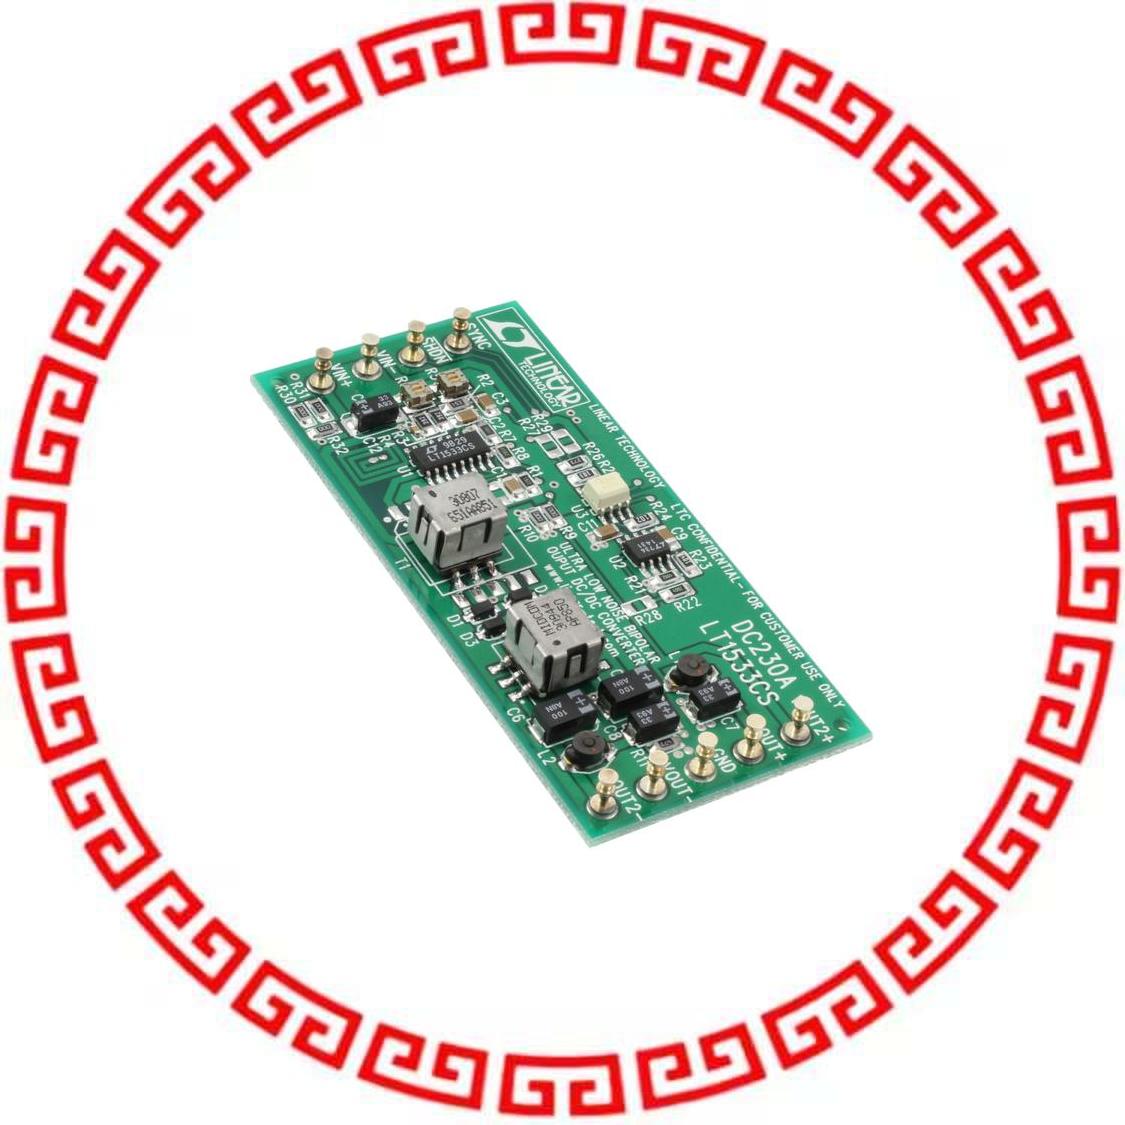 DC230A-D BOARD EVAL FOR LT1533CS